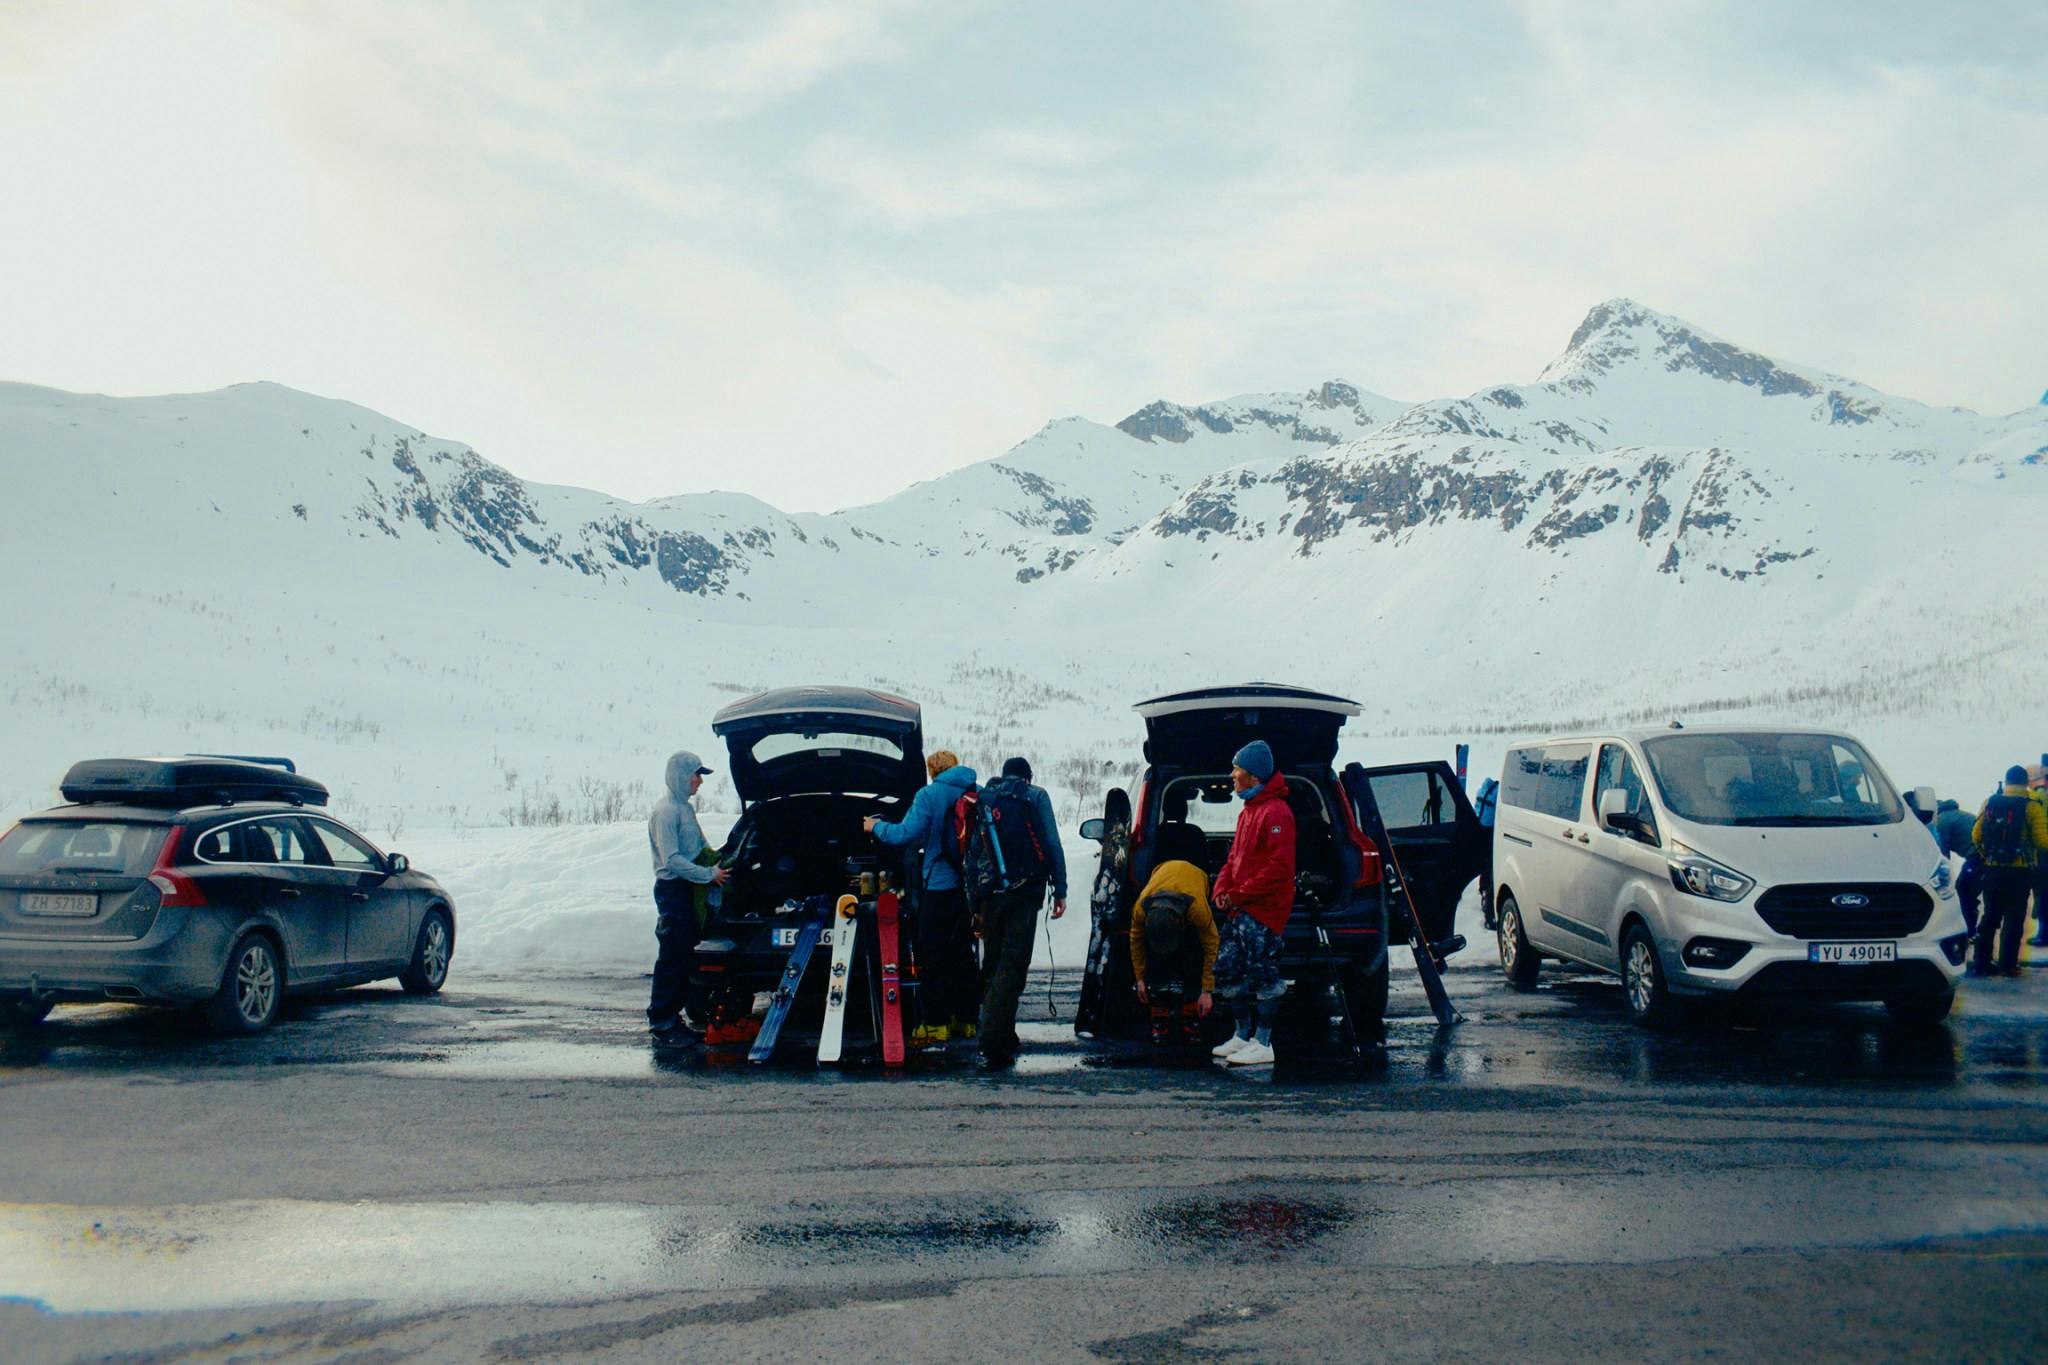 People surrounding two cars with a snowy peak in the background